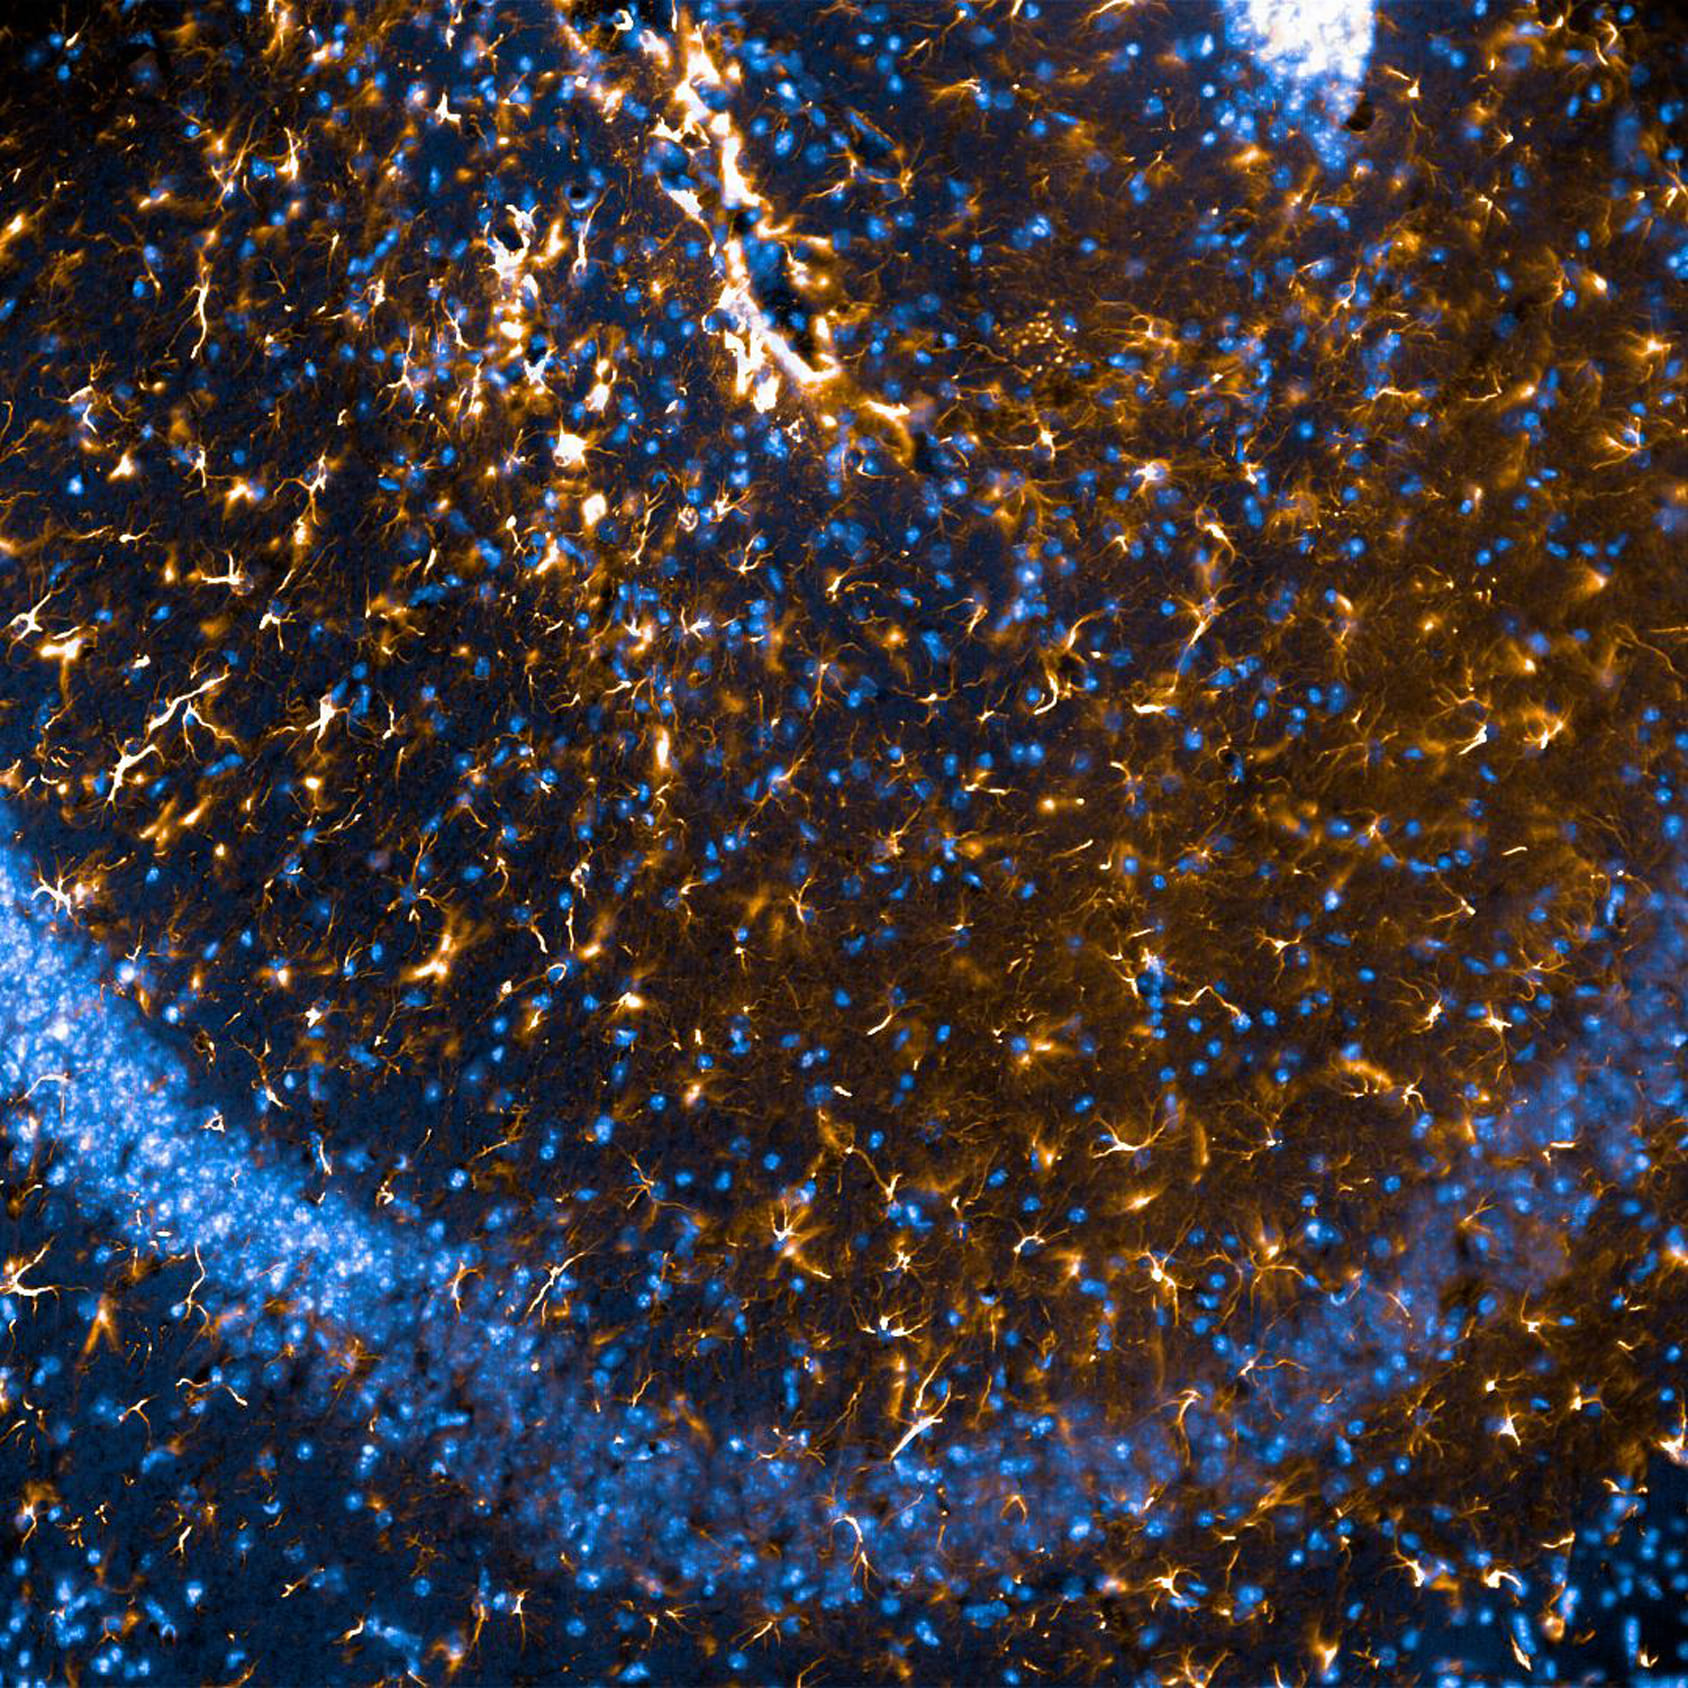 The image of this microphotography corresponds to a mouse brain. In blue we can see the nuclei of the neurons, arranged in a complex and orderly distribution. Meanwhile, in red we can see how the blue pathway described by the neuronal nuclei is followed by a mantle of stellate cells. It is precisely the stellar shape of this cell type that is the original reason for its name: astrocytes.